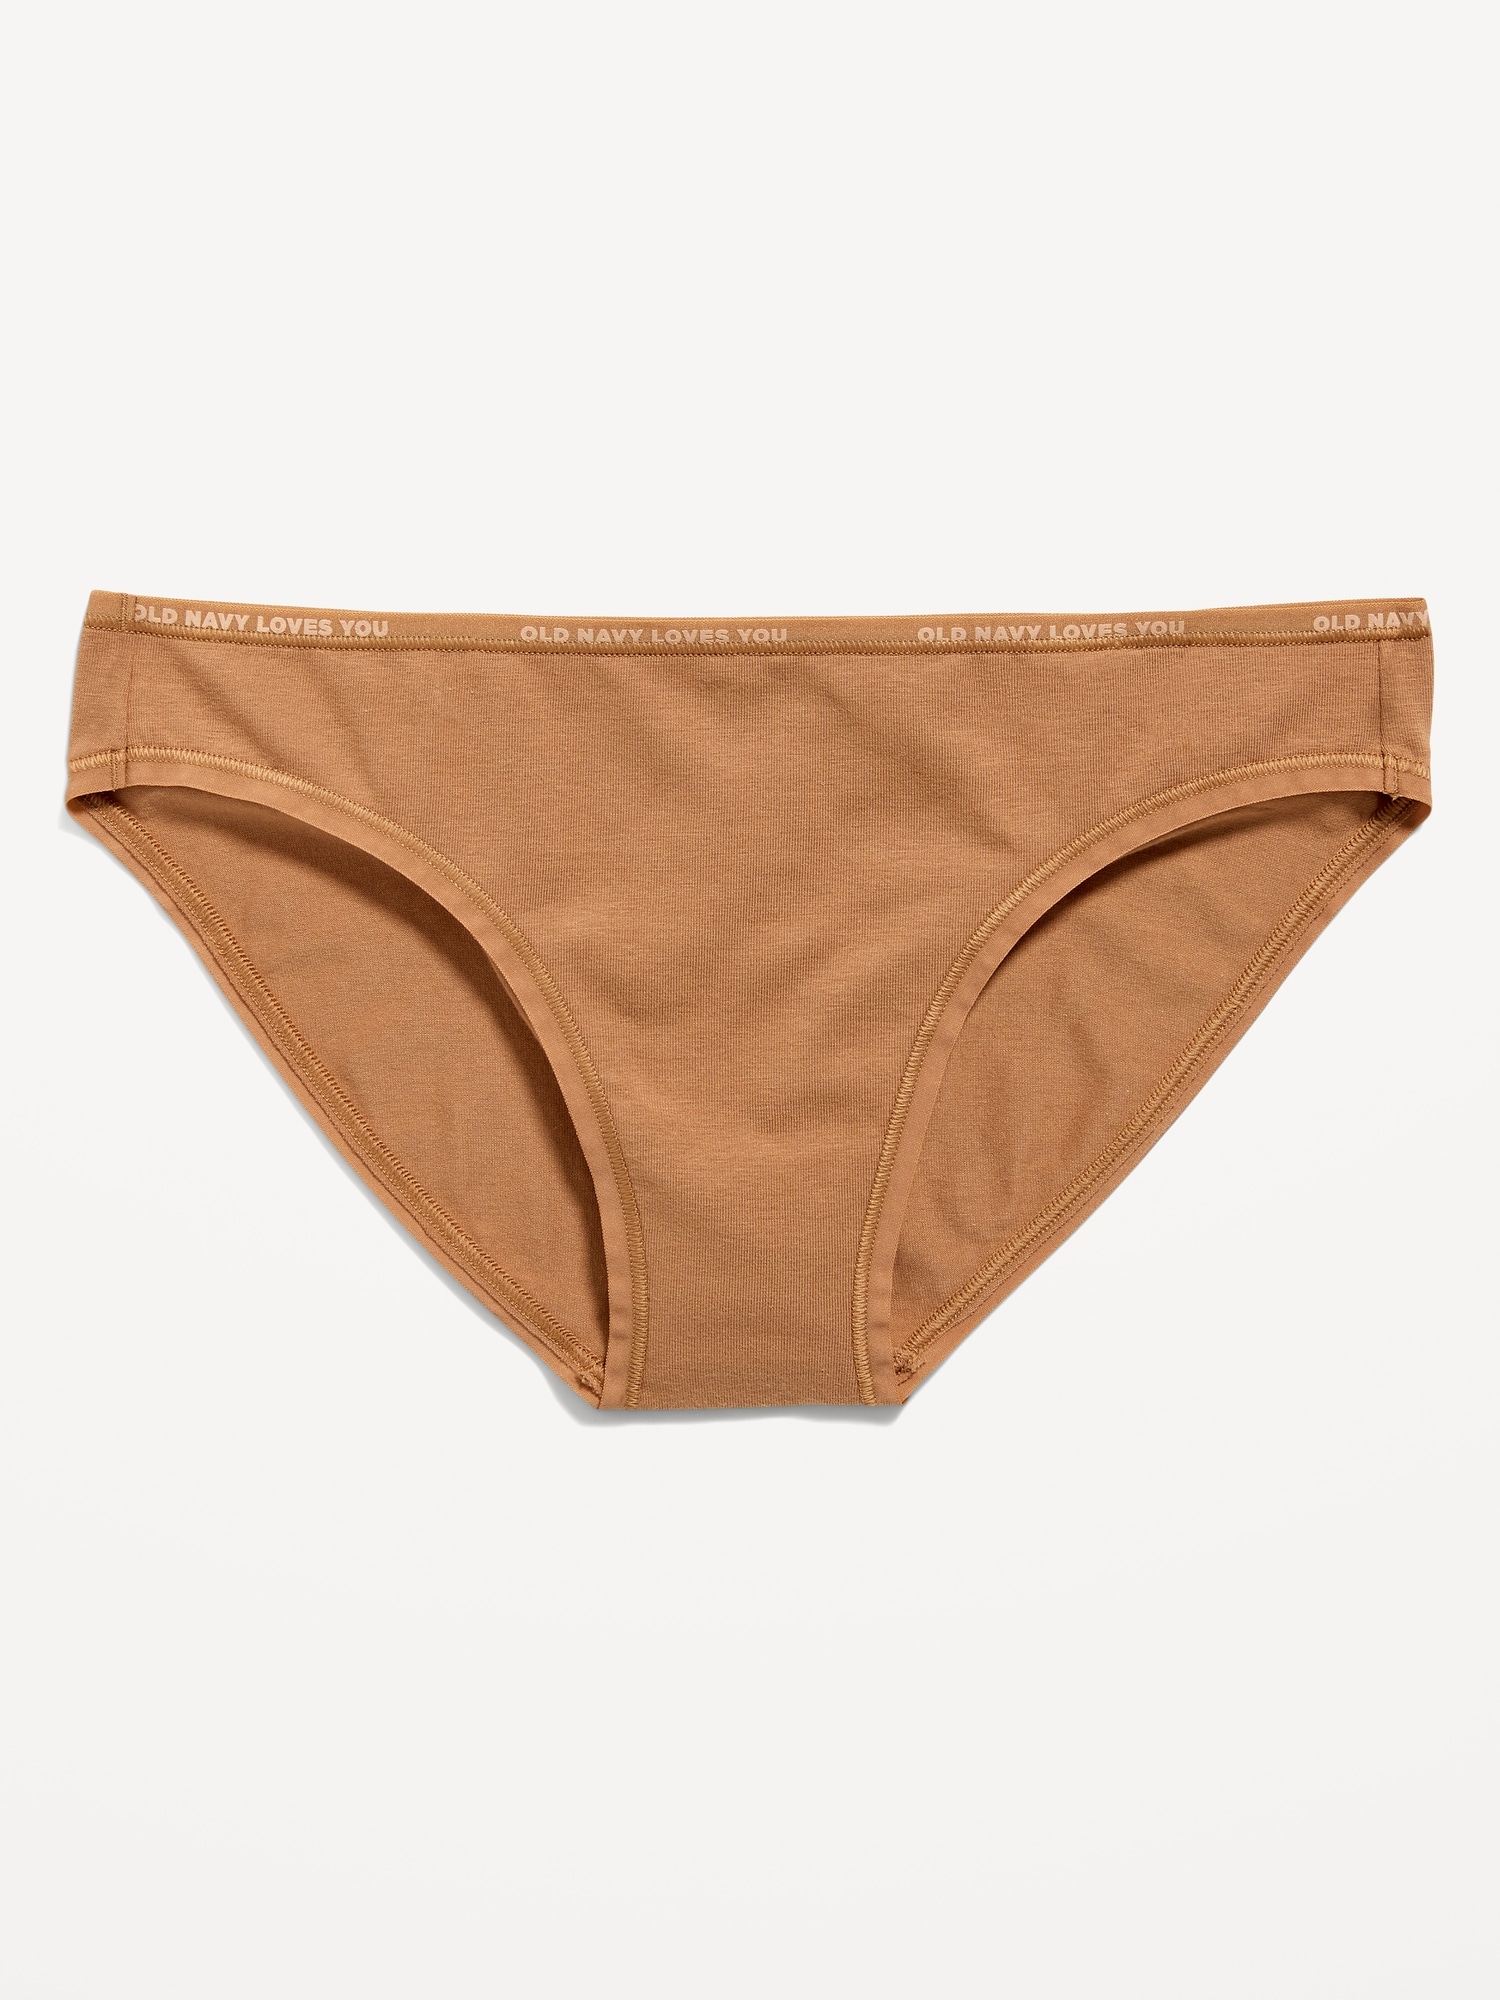 Old Navy Womens Tan Mesh 3 Pack Underwear Size Small - beyond exchange